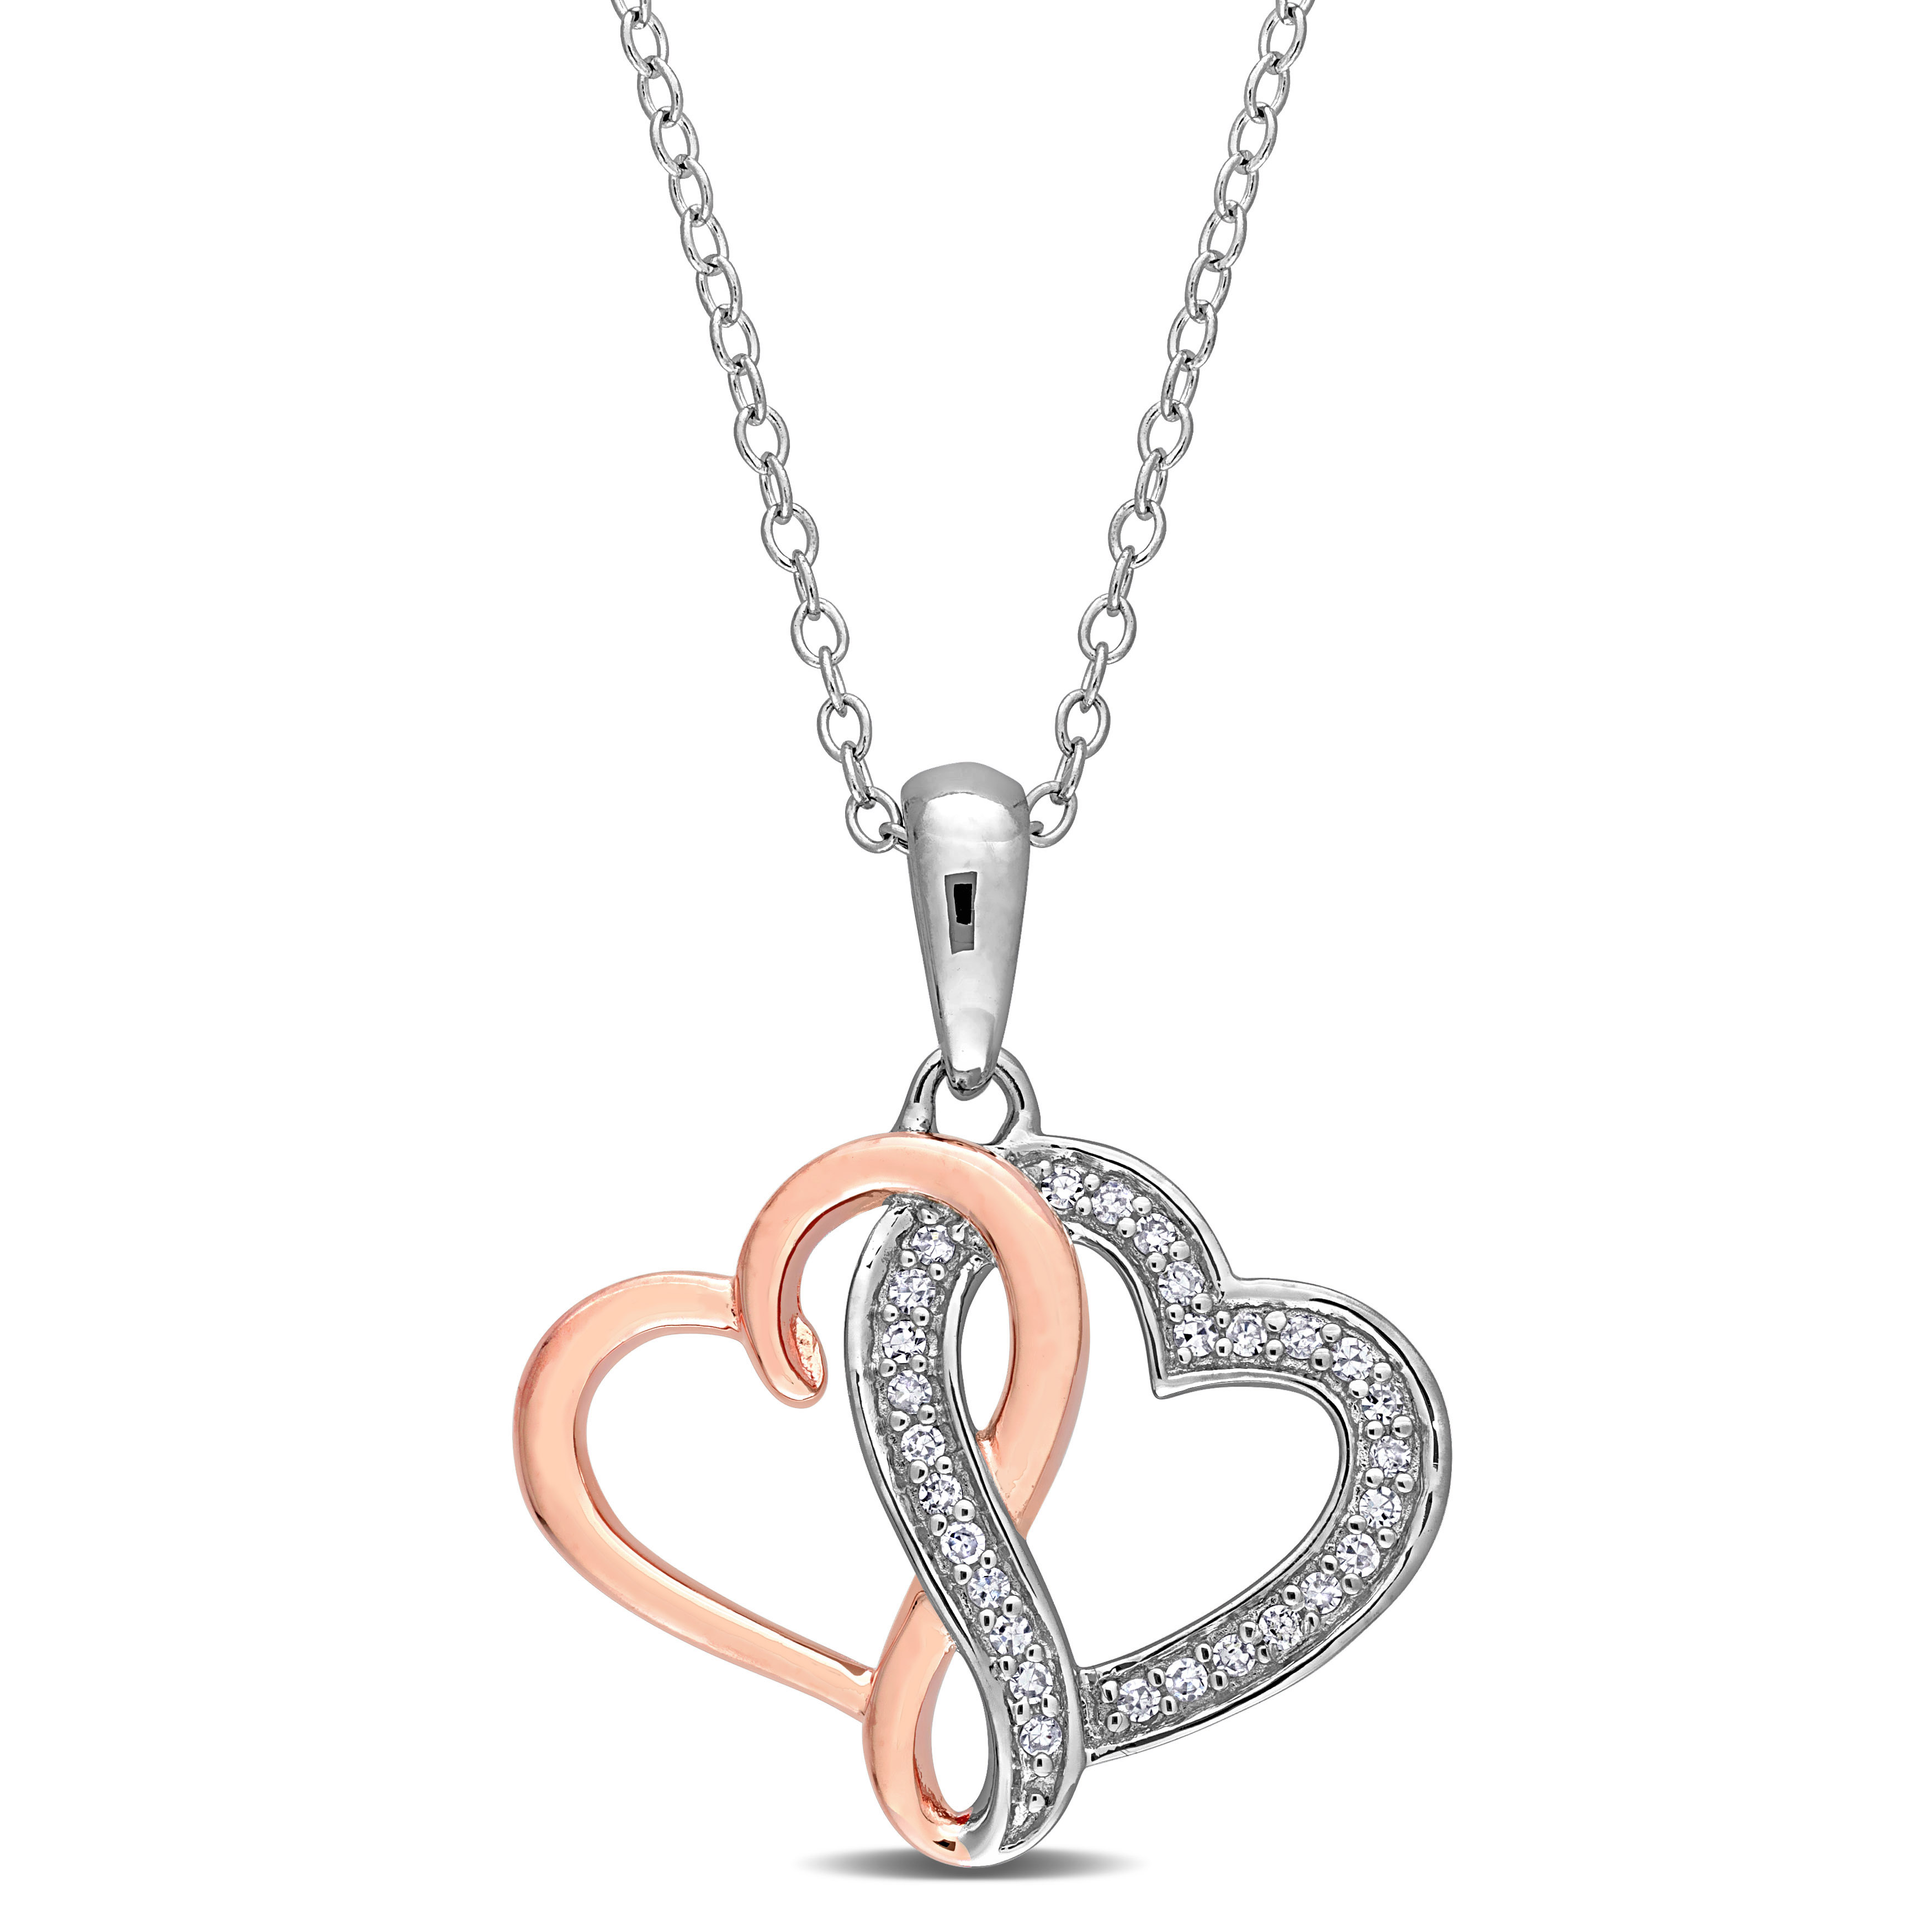 1/7 CT TW Diamond Interlocking Heart Pendant with Chain in 2-Tone Pink and White Sterling Silver